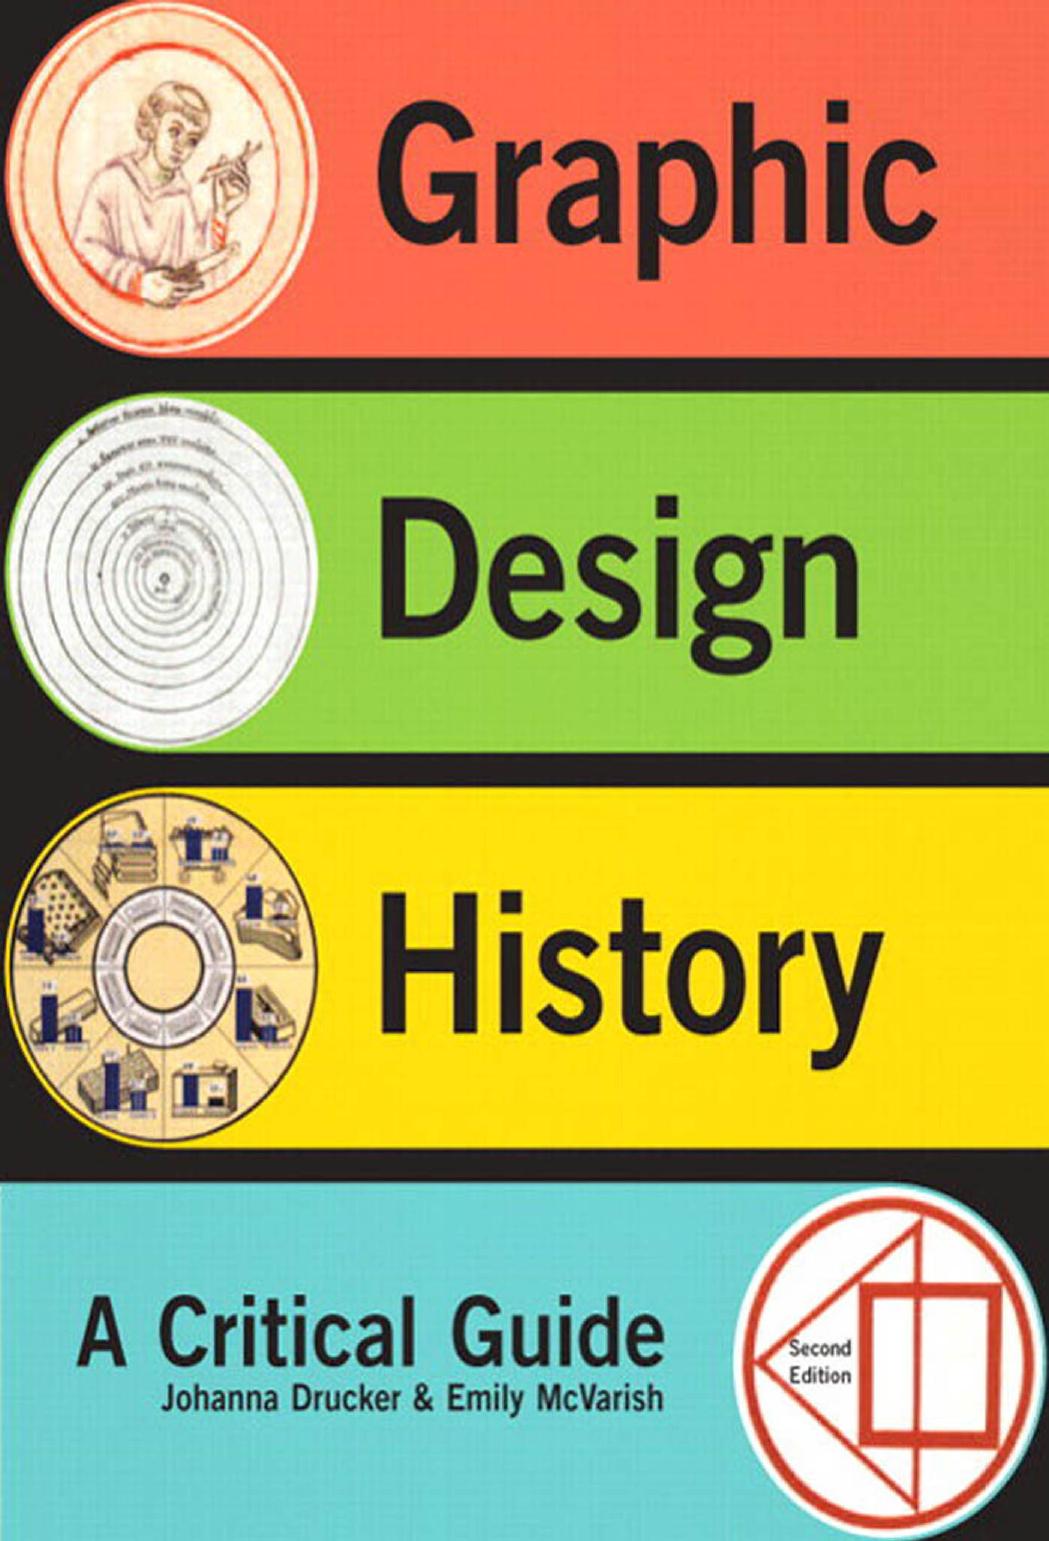 Graphic Design History A Critical Guide 2nd Edition by Johanna Drucker  , Emily McVarish 